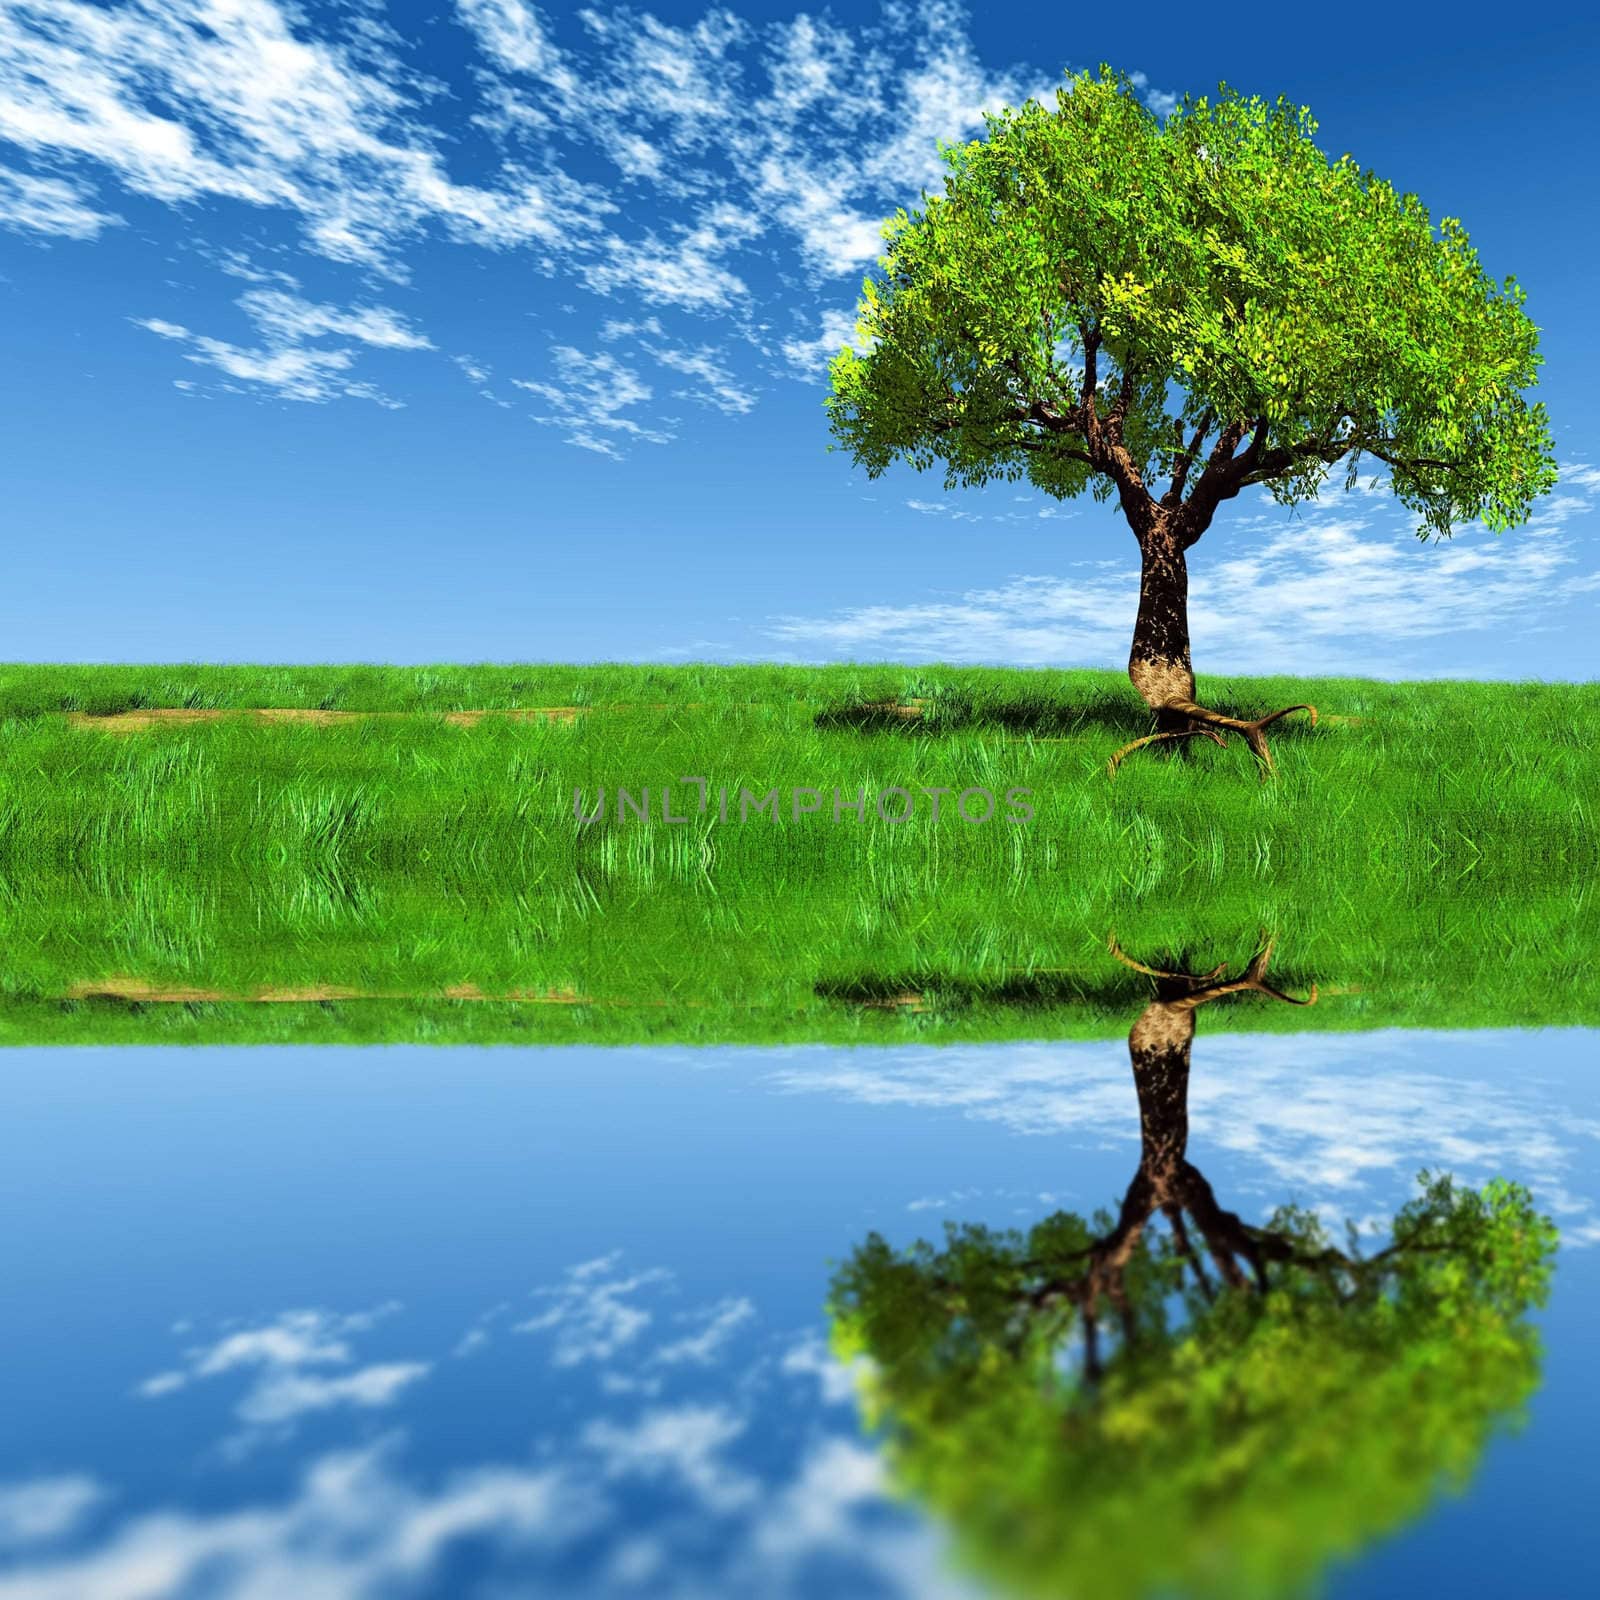 the tree, the meadow and water